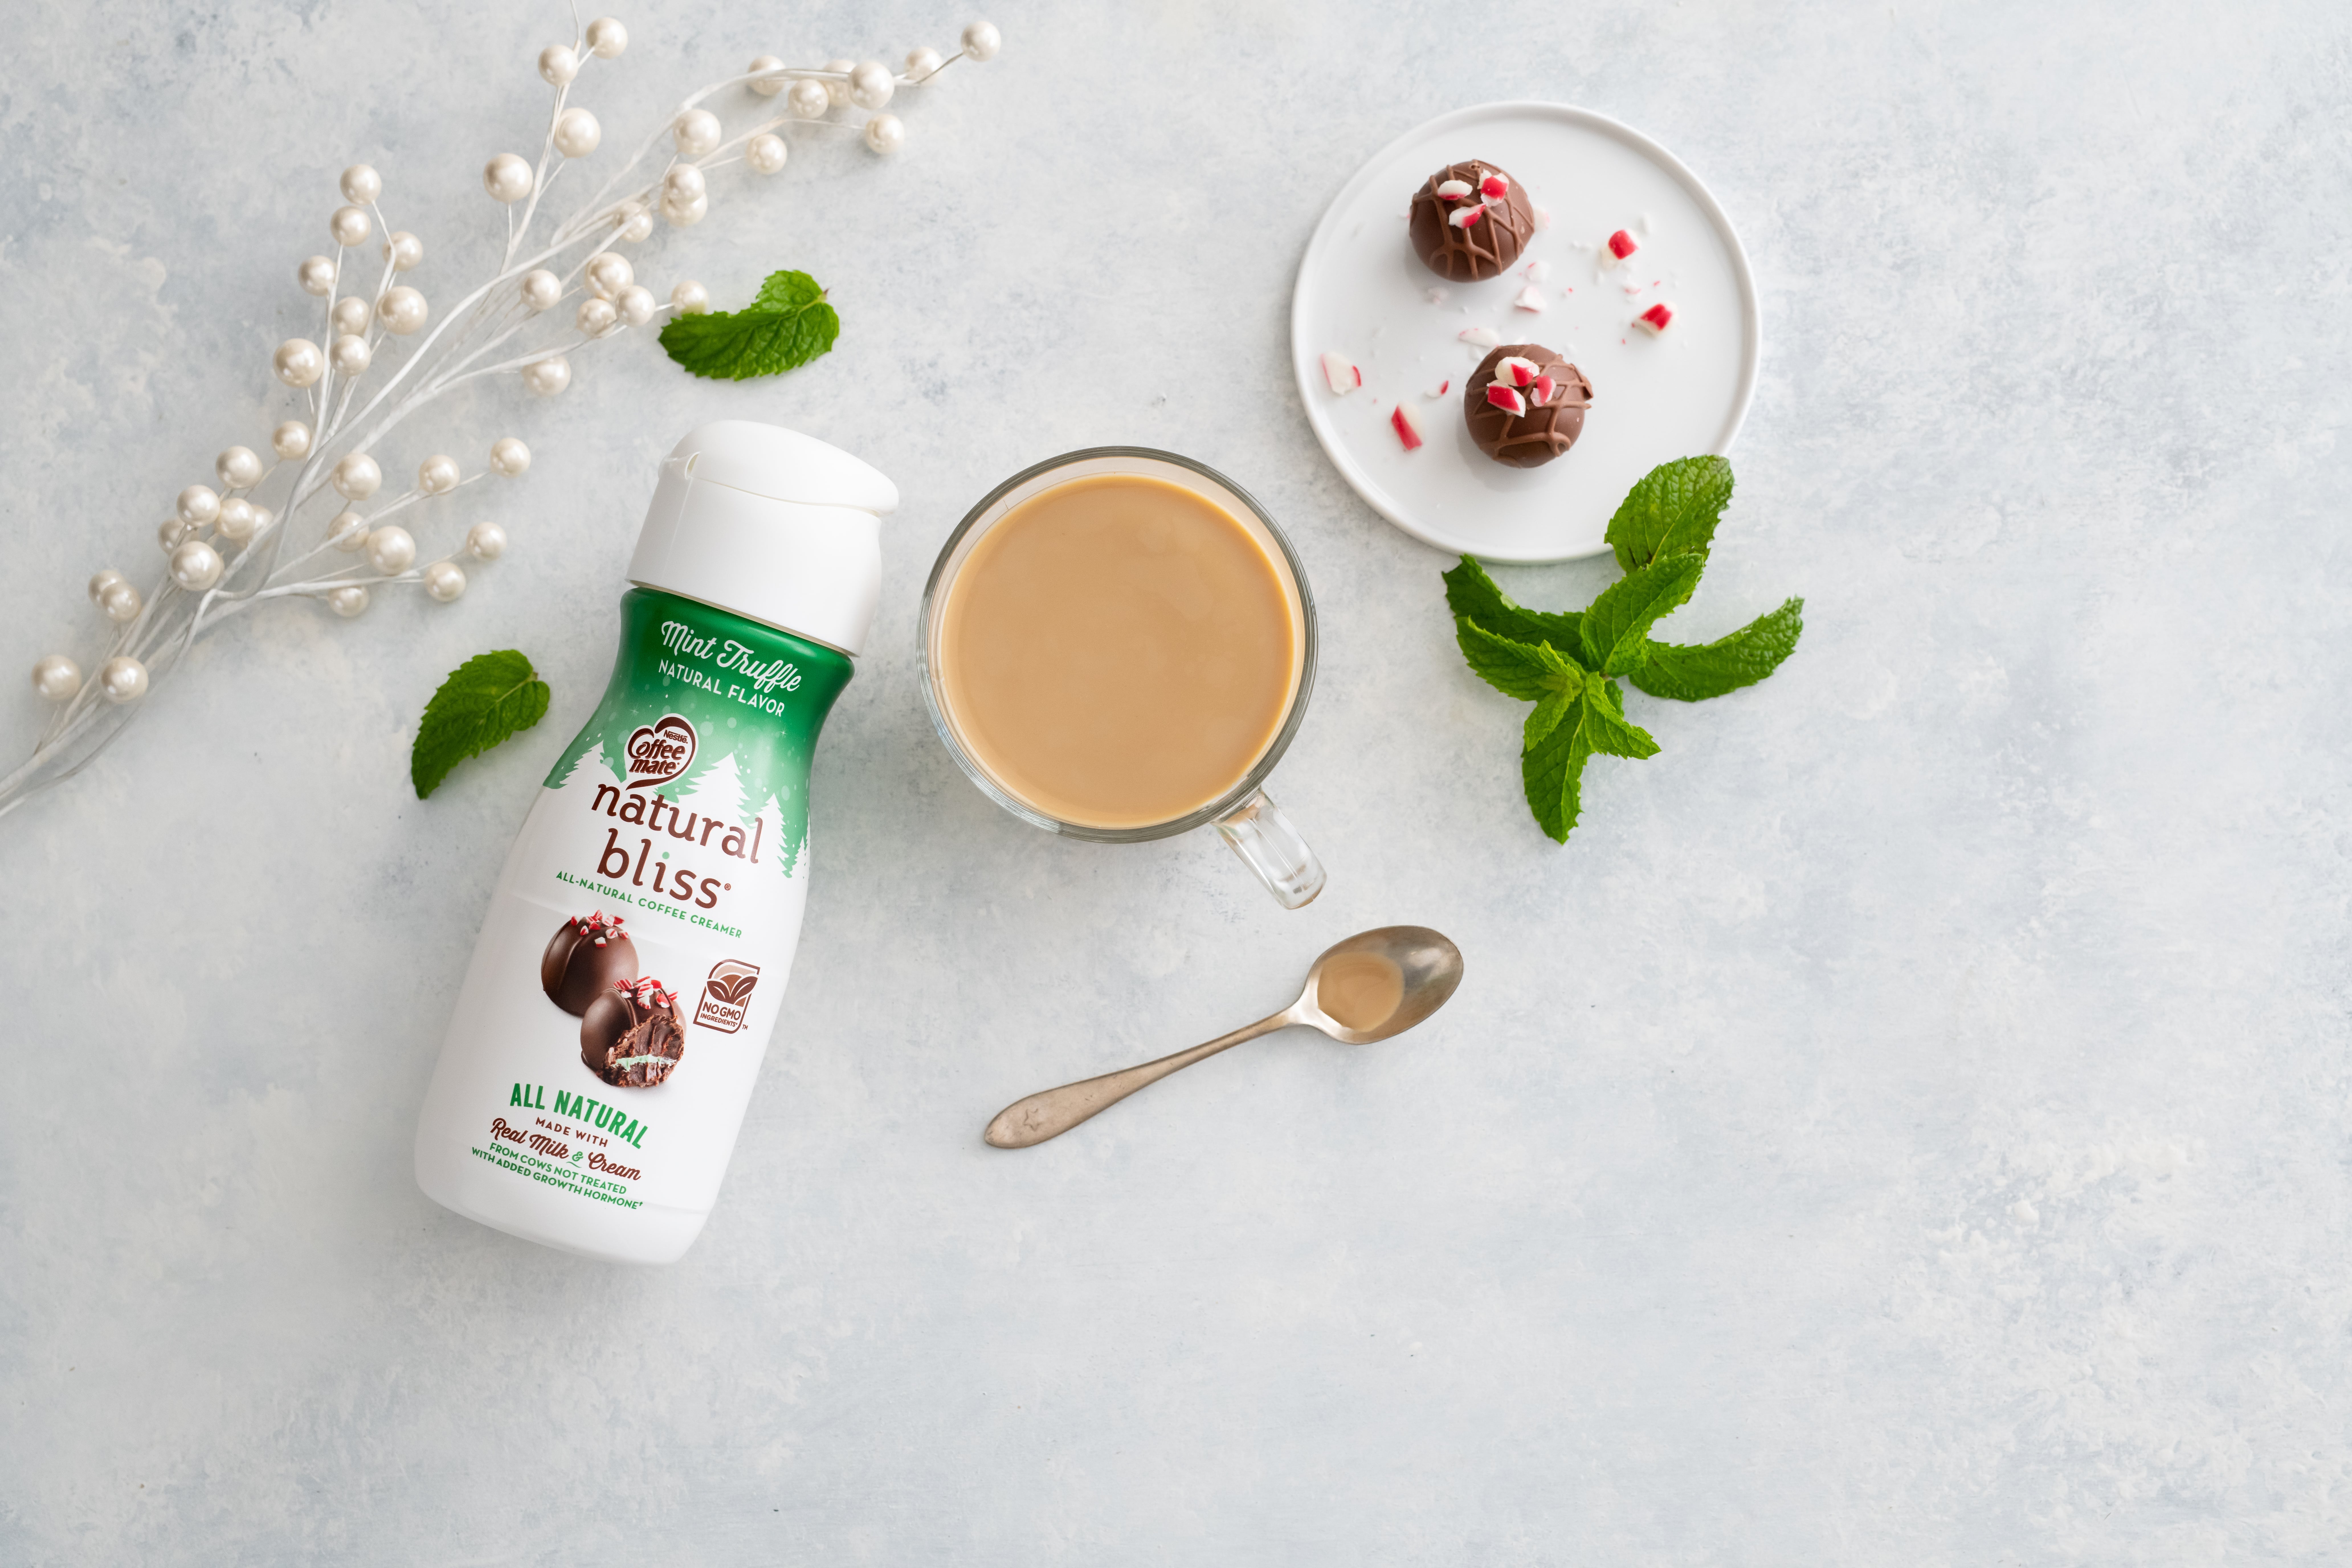 Coffee mate Just Announced Three New Holiday Cream Flavors